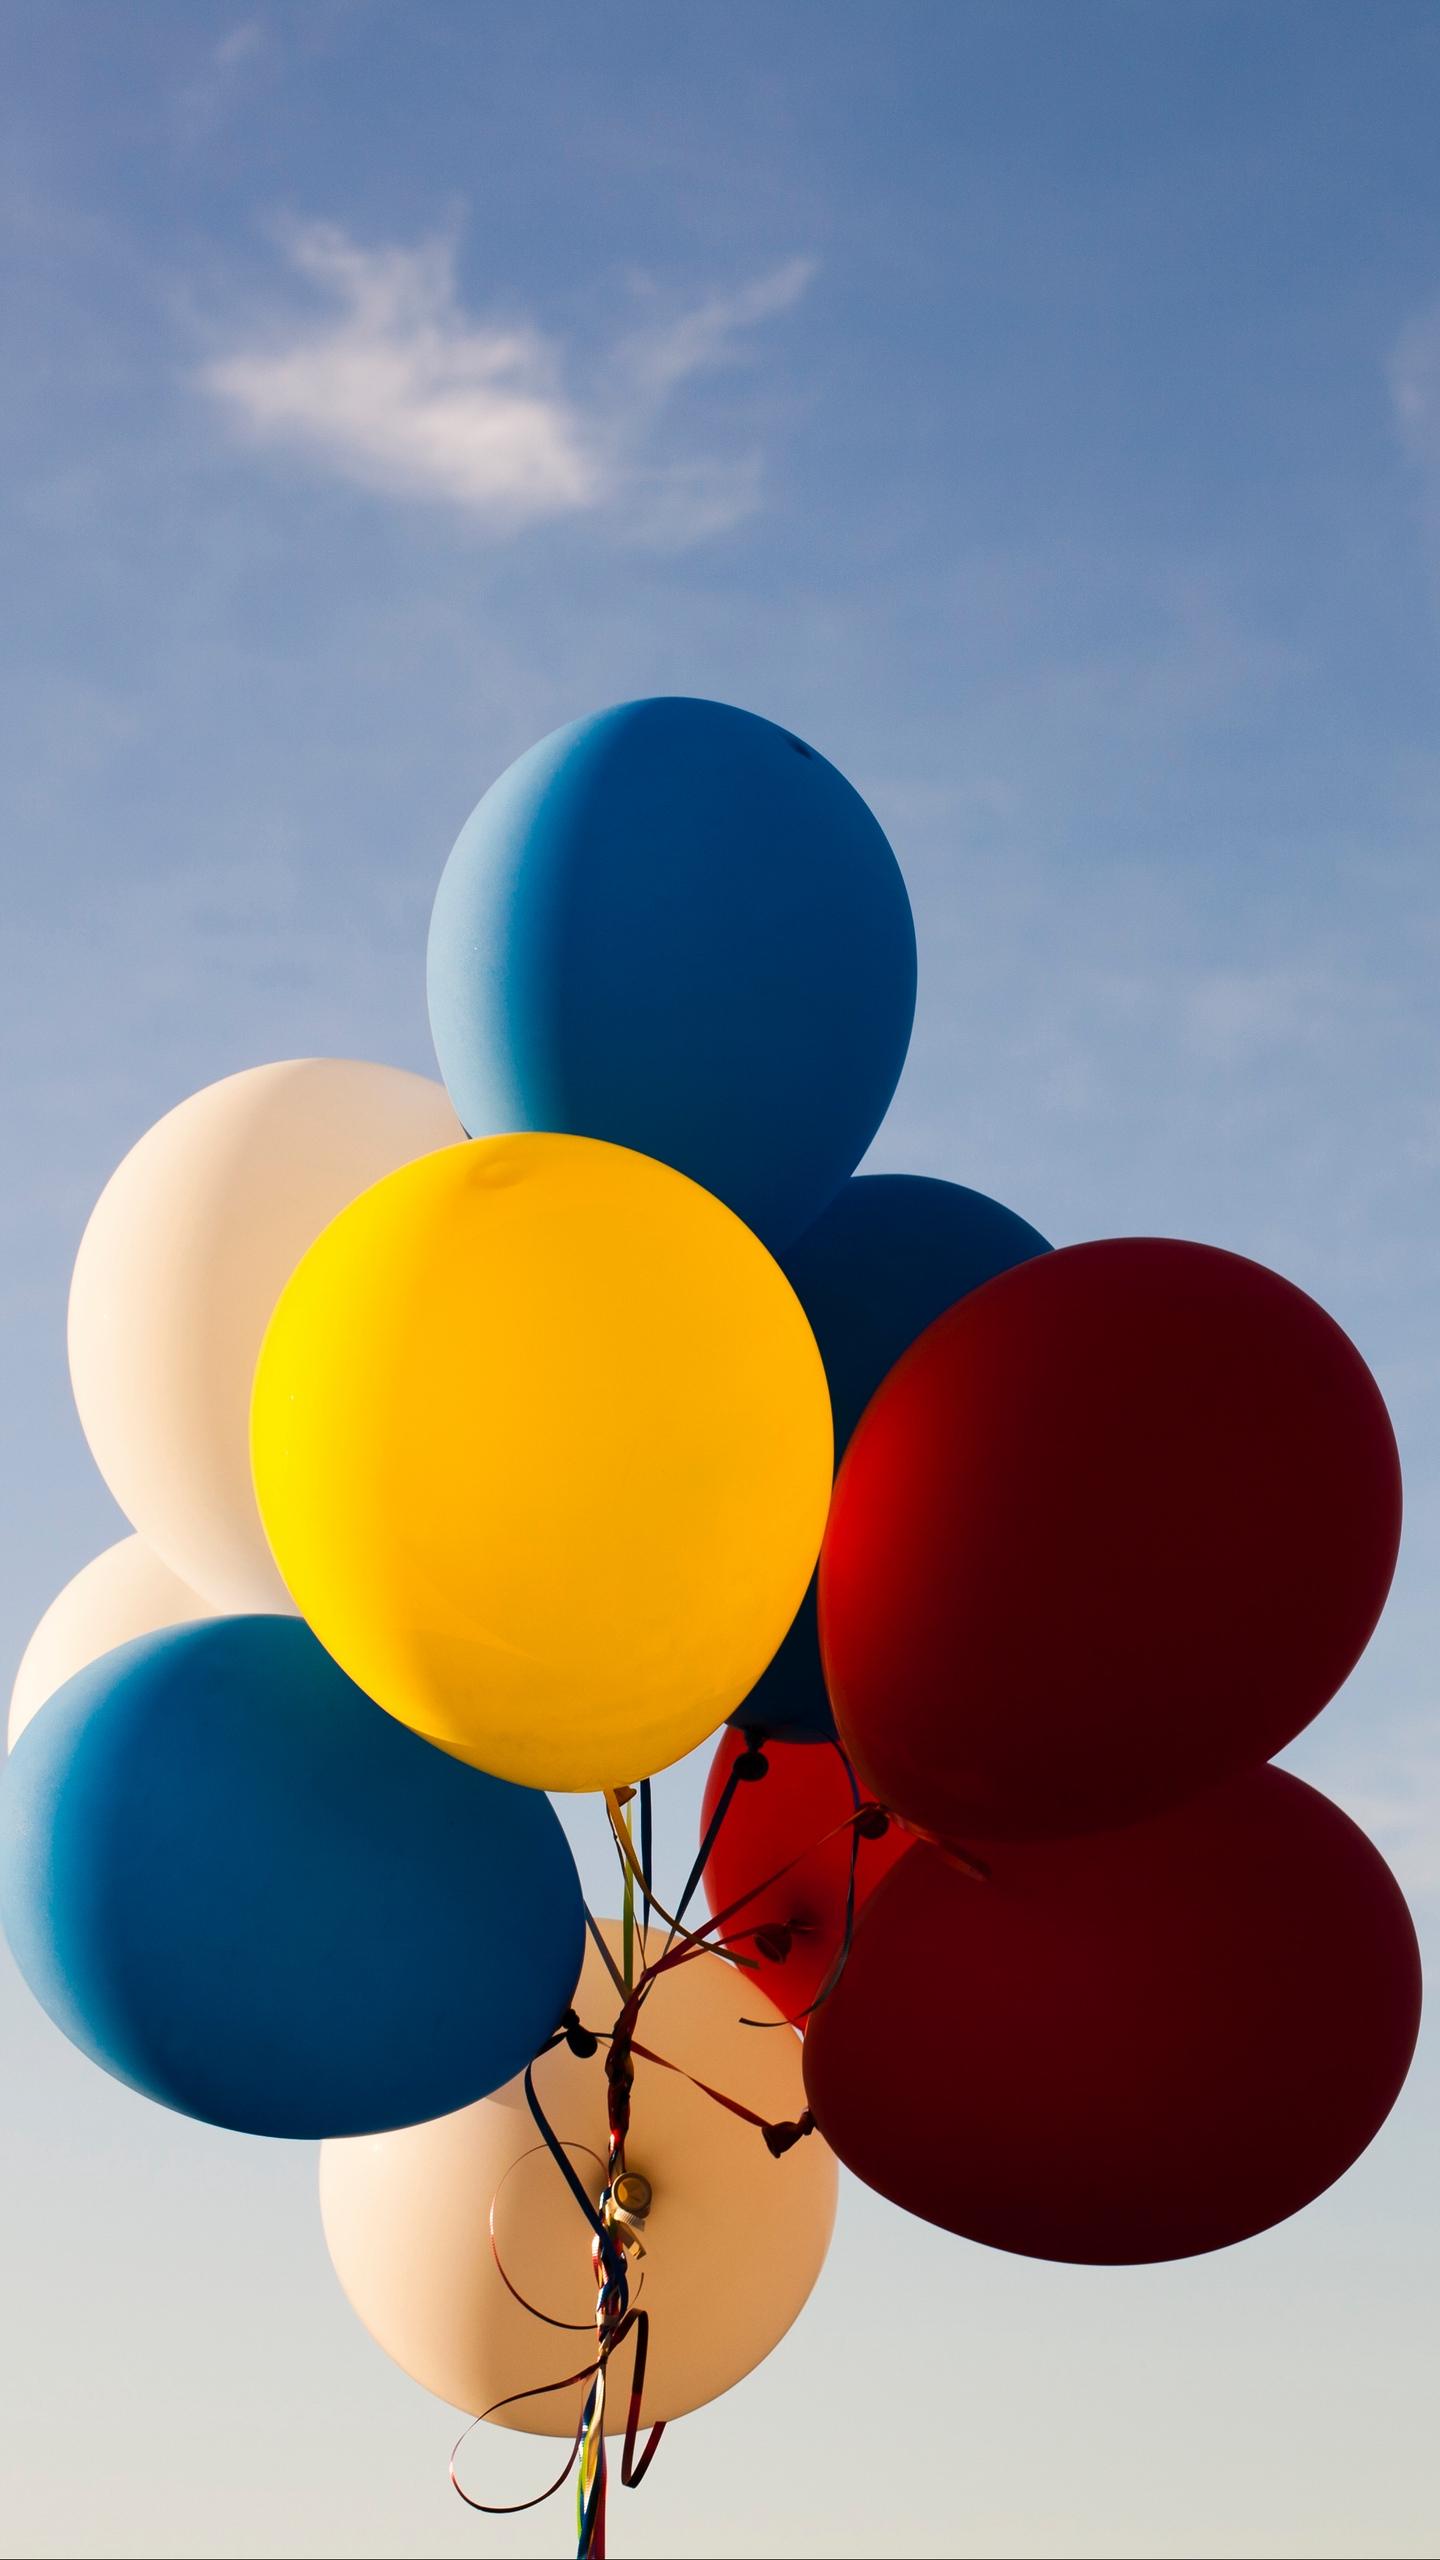 Download wallpaper 1440x2560 balloons, sky, colorful qhd